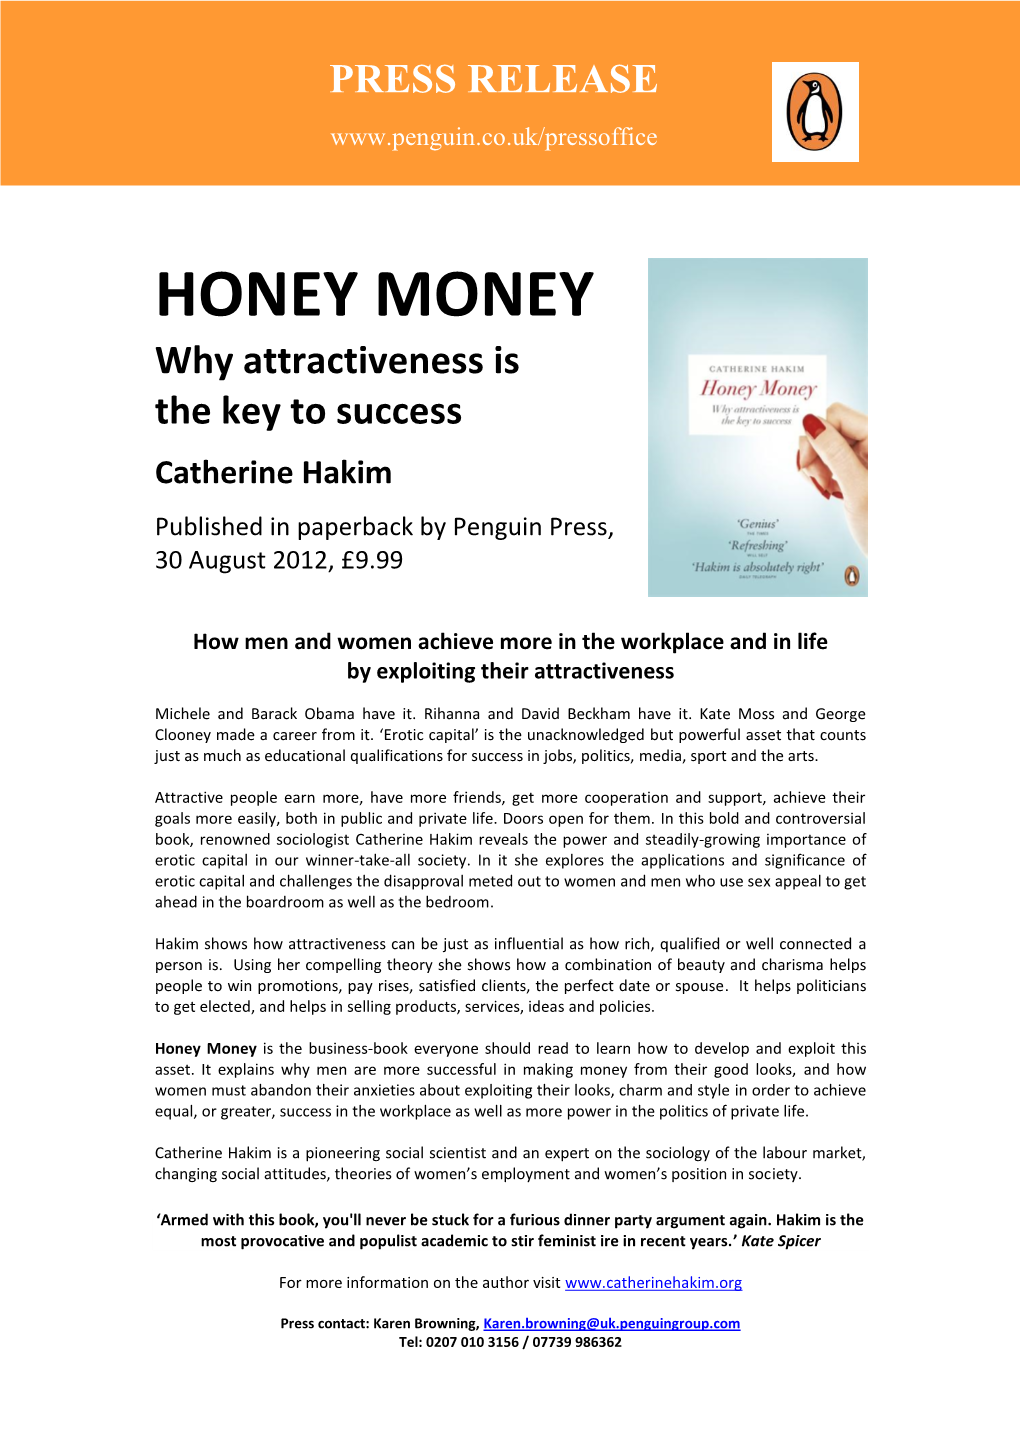 HONEY MONEY Why Attractiveness Is the Key to Success